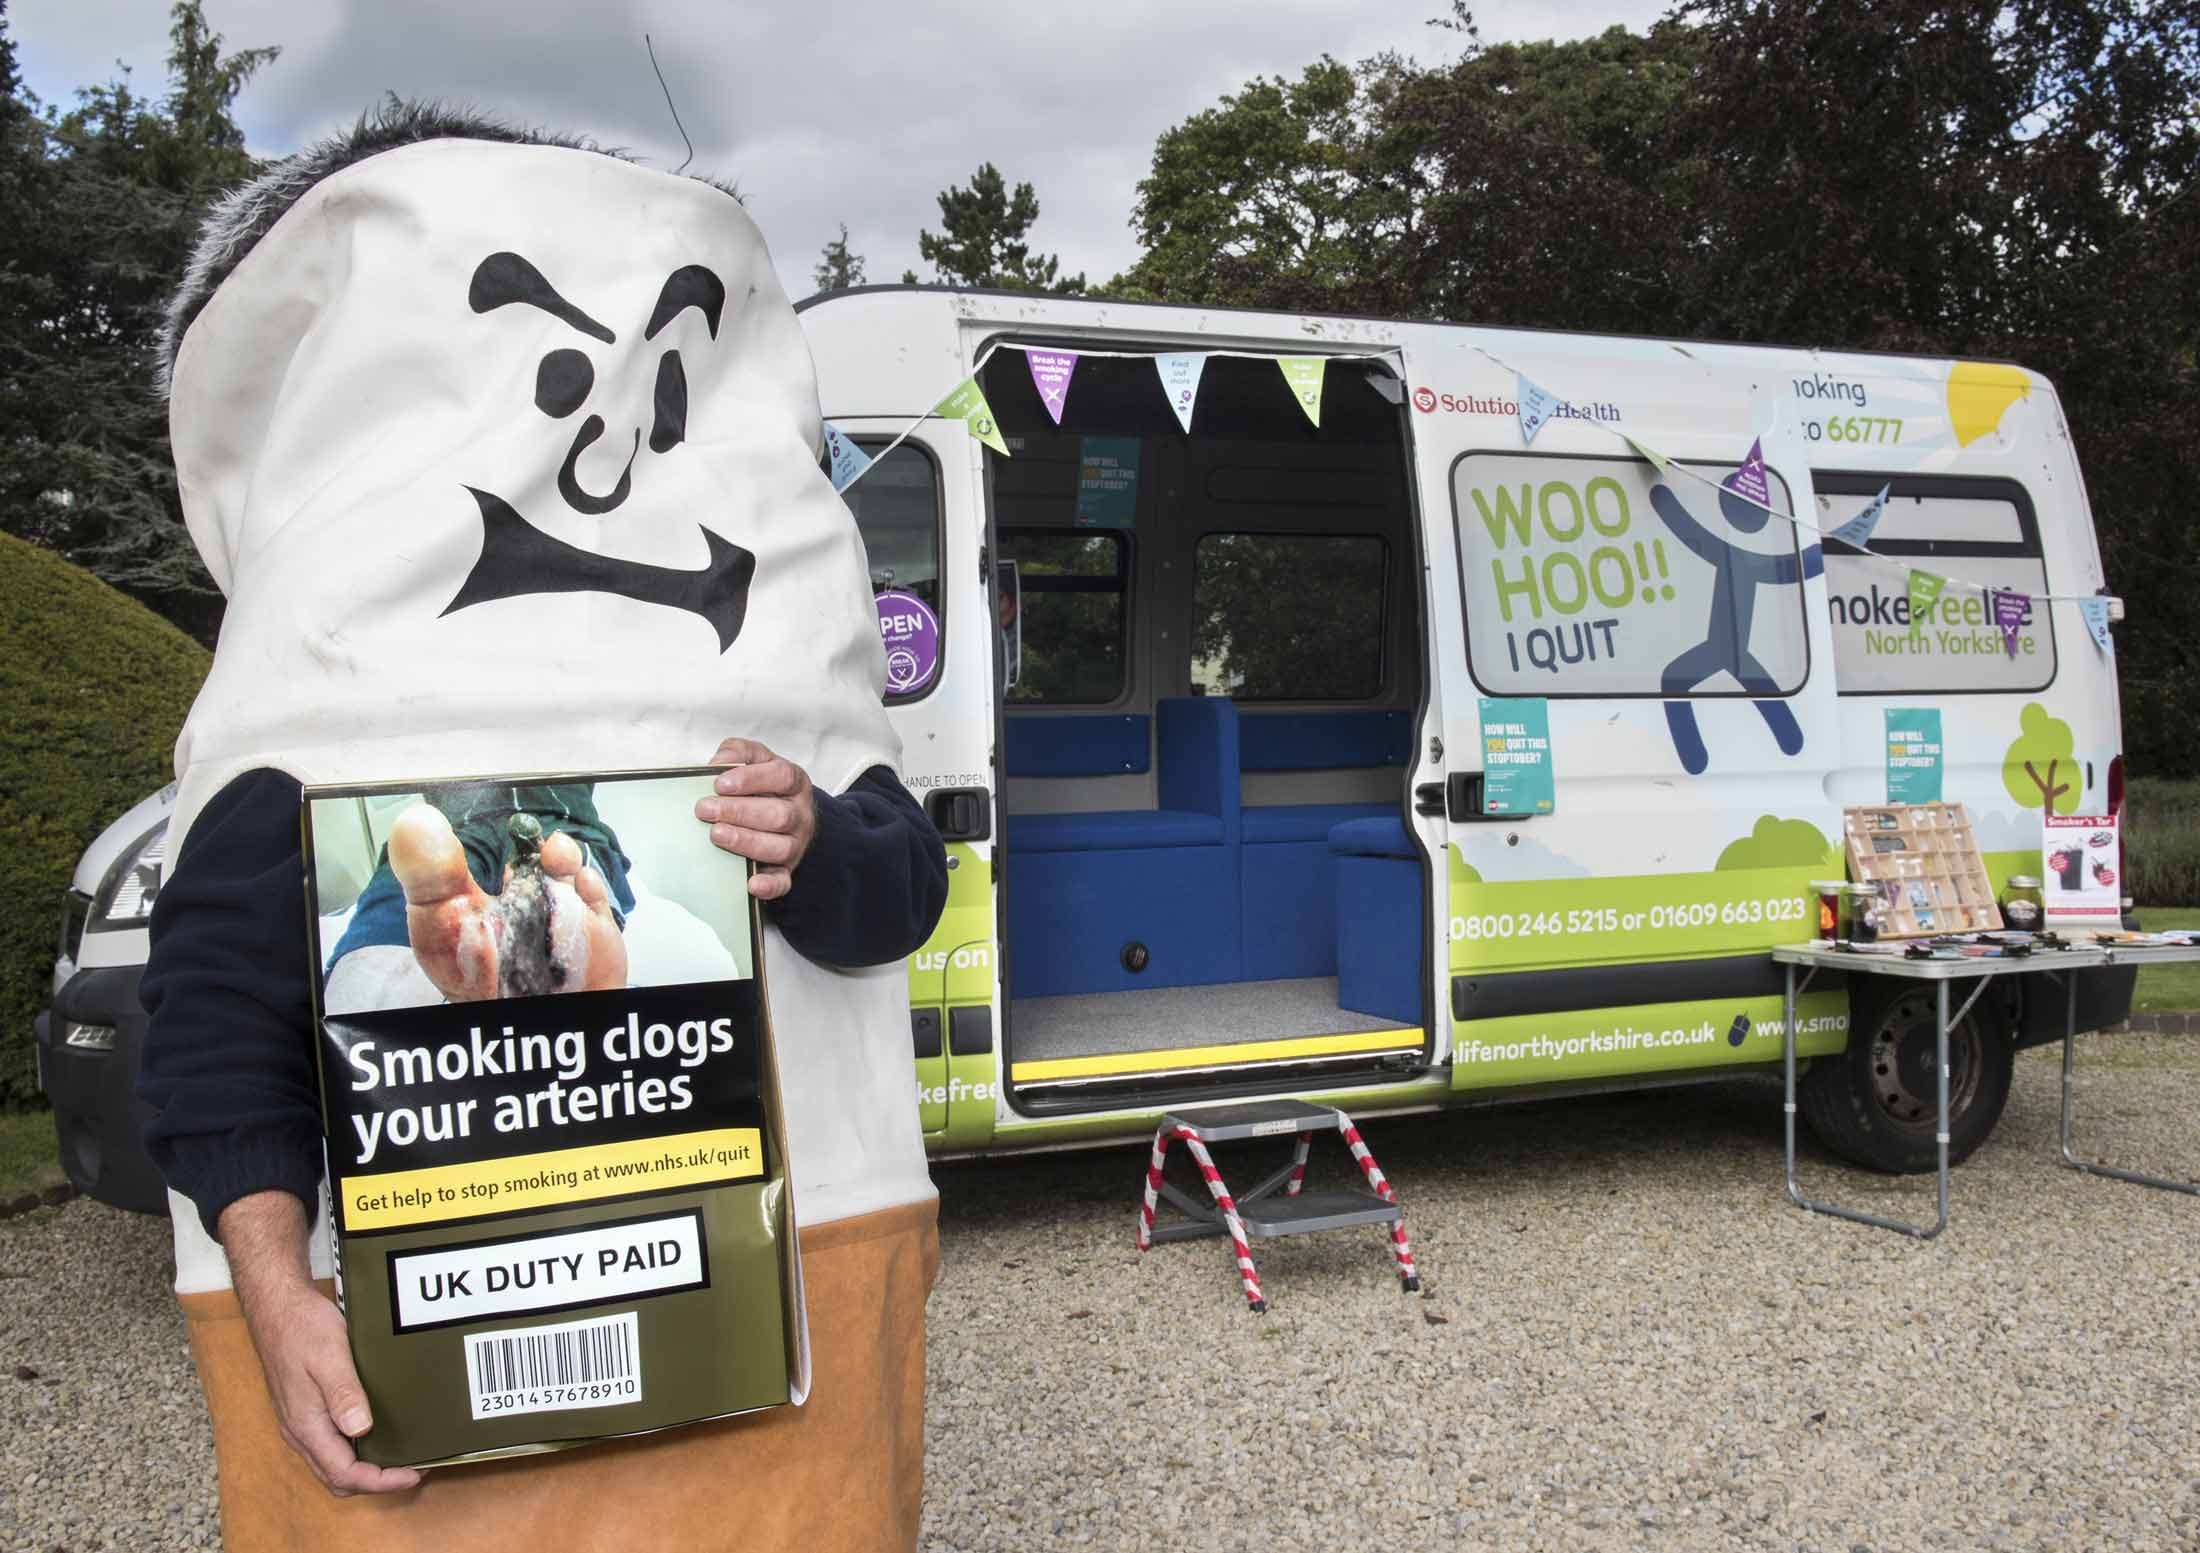 Wellness on wheels - Smokefreelifenorthyorkshire has a mobile clinic which tours the county